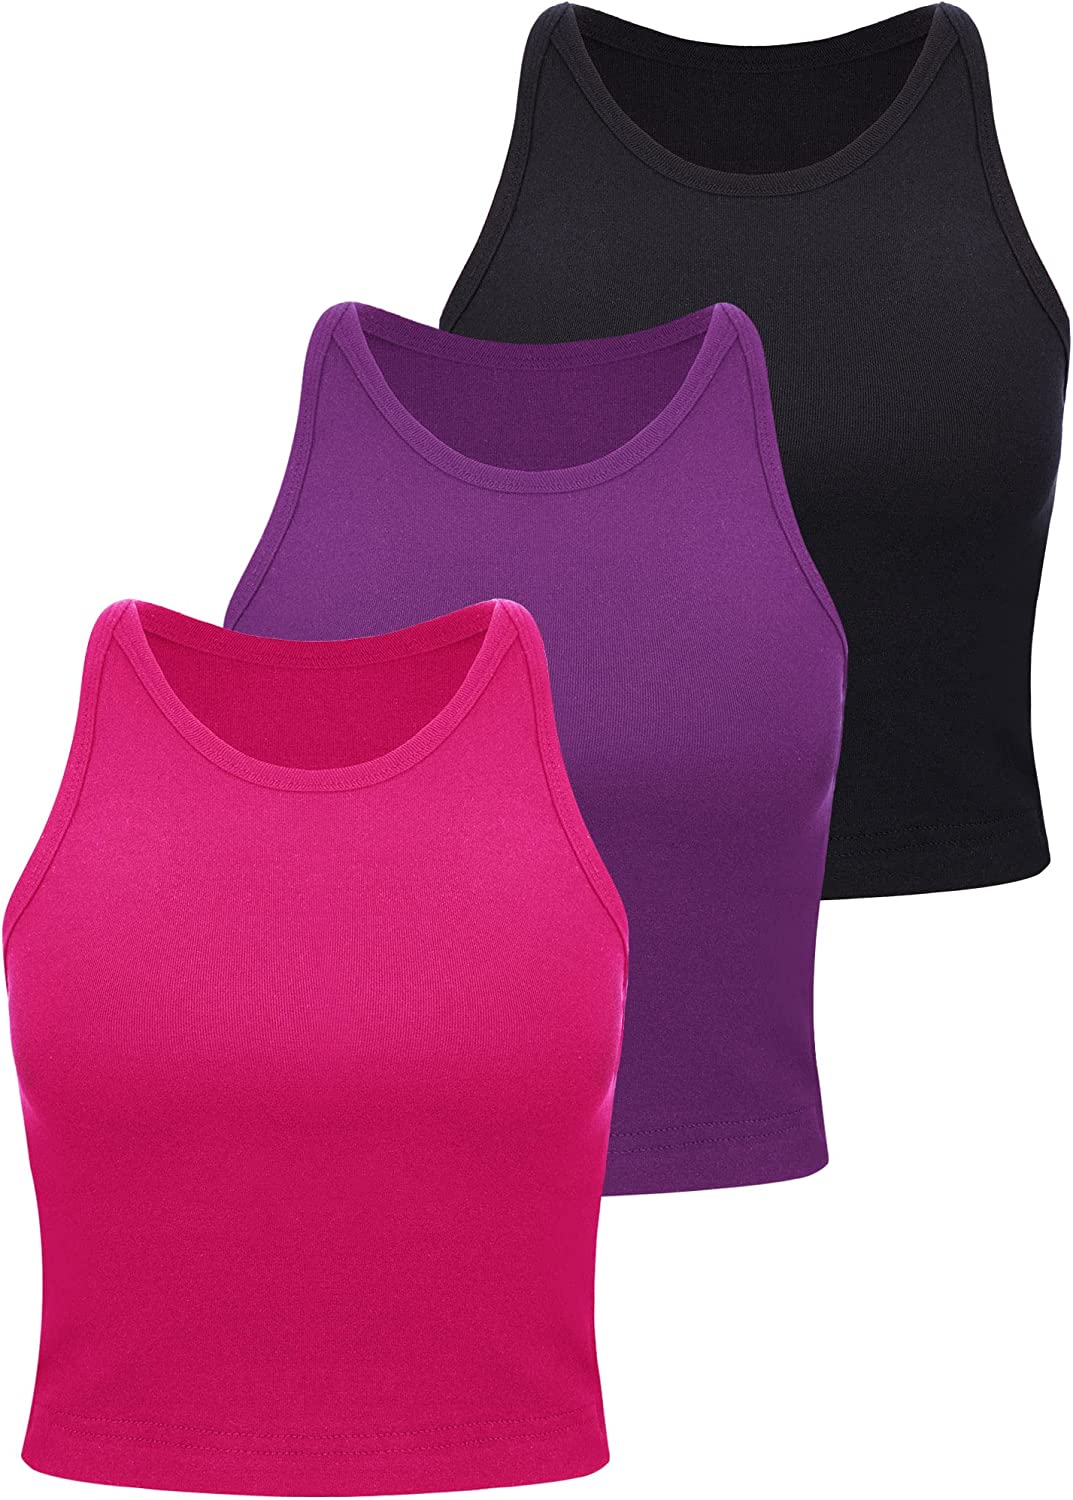 3 Pieces Women's Cotton Basic Sleeveless Racerback Crop Tank Top Sports Crop Top for Lady Girls Daily Wearing